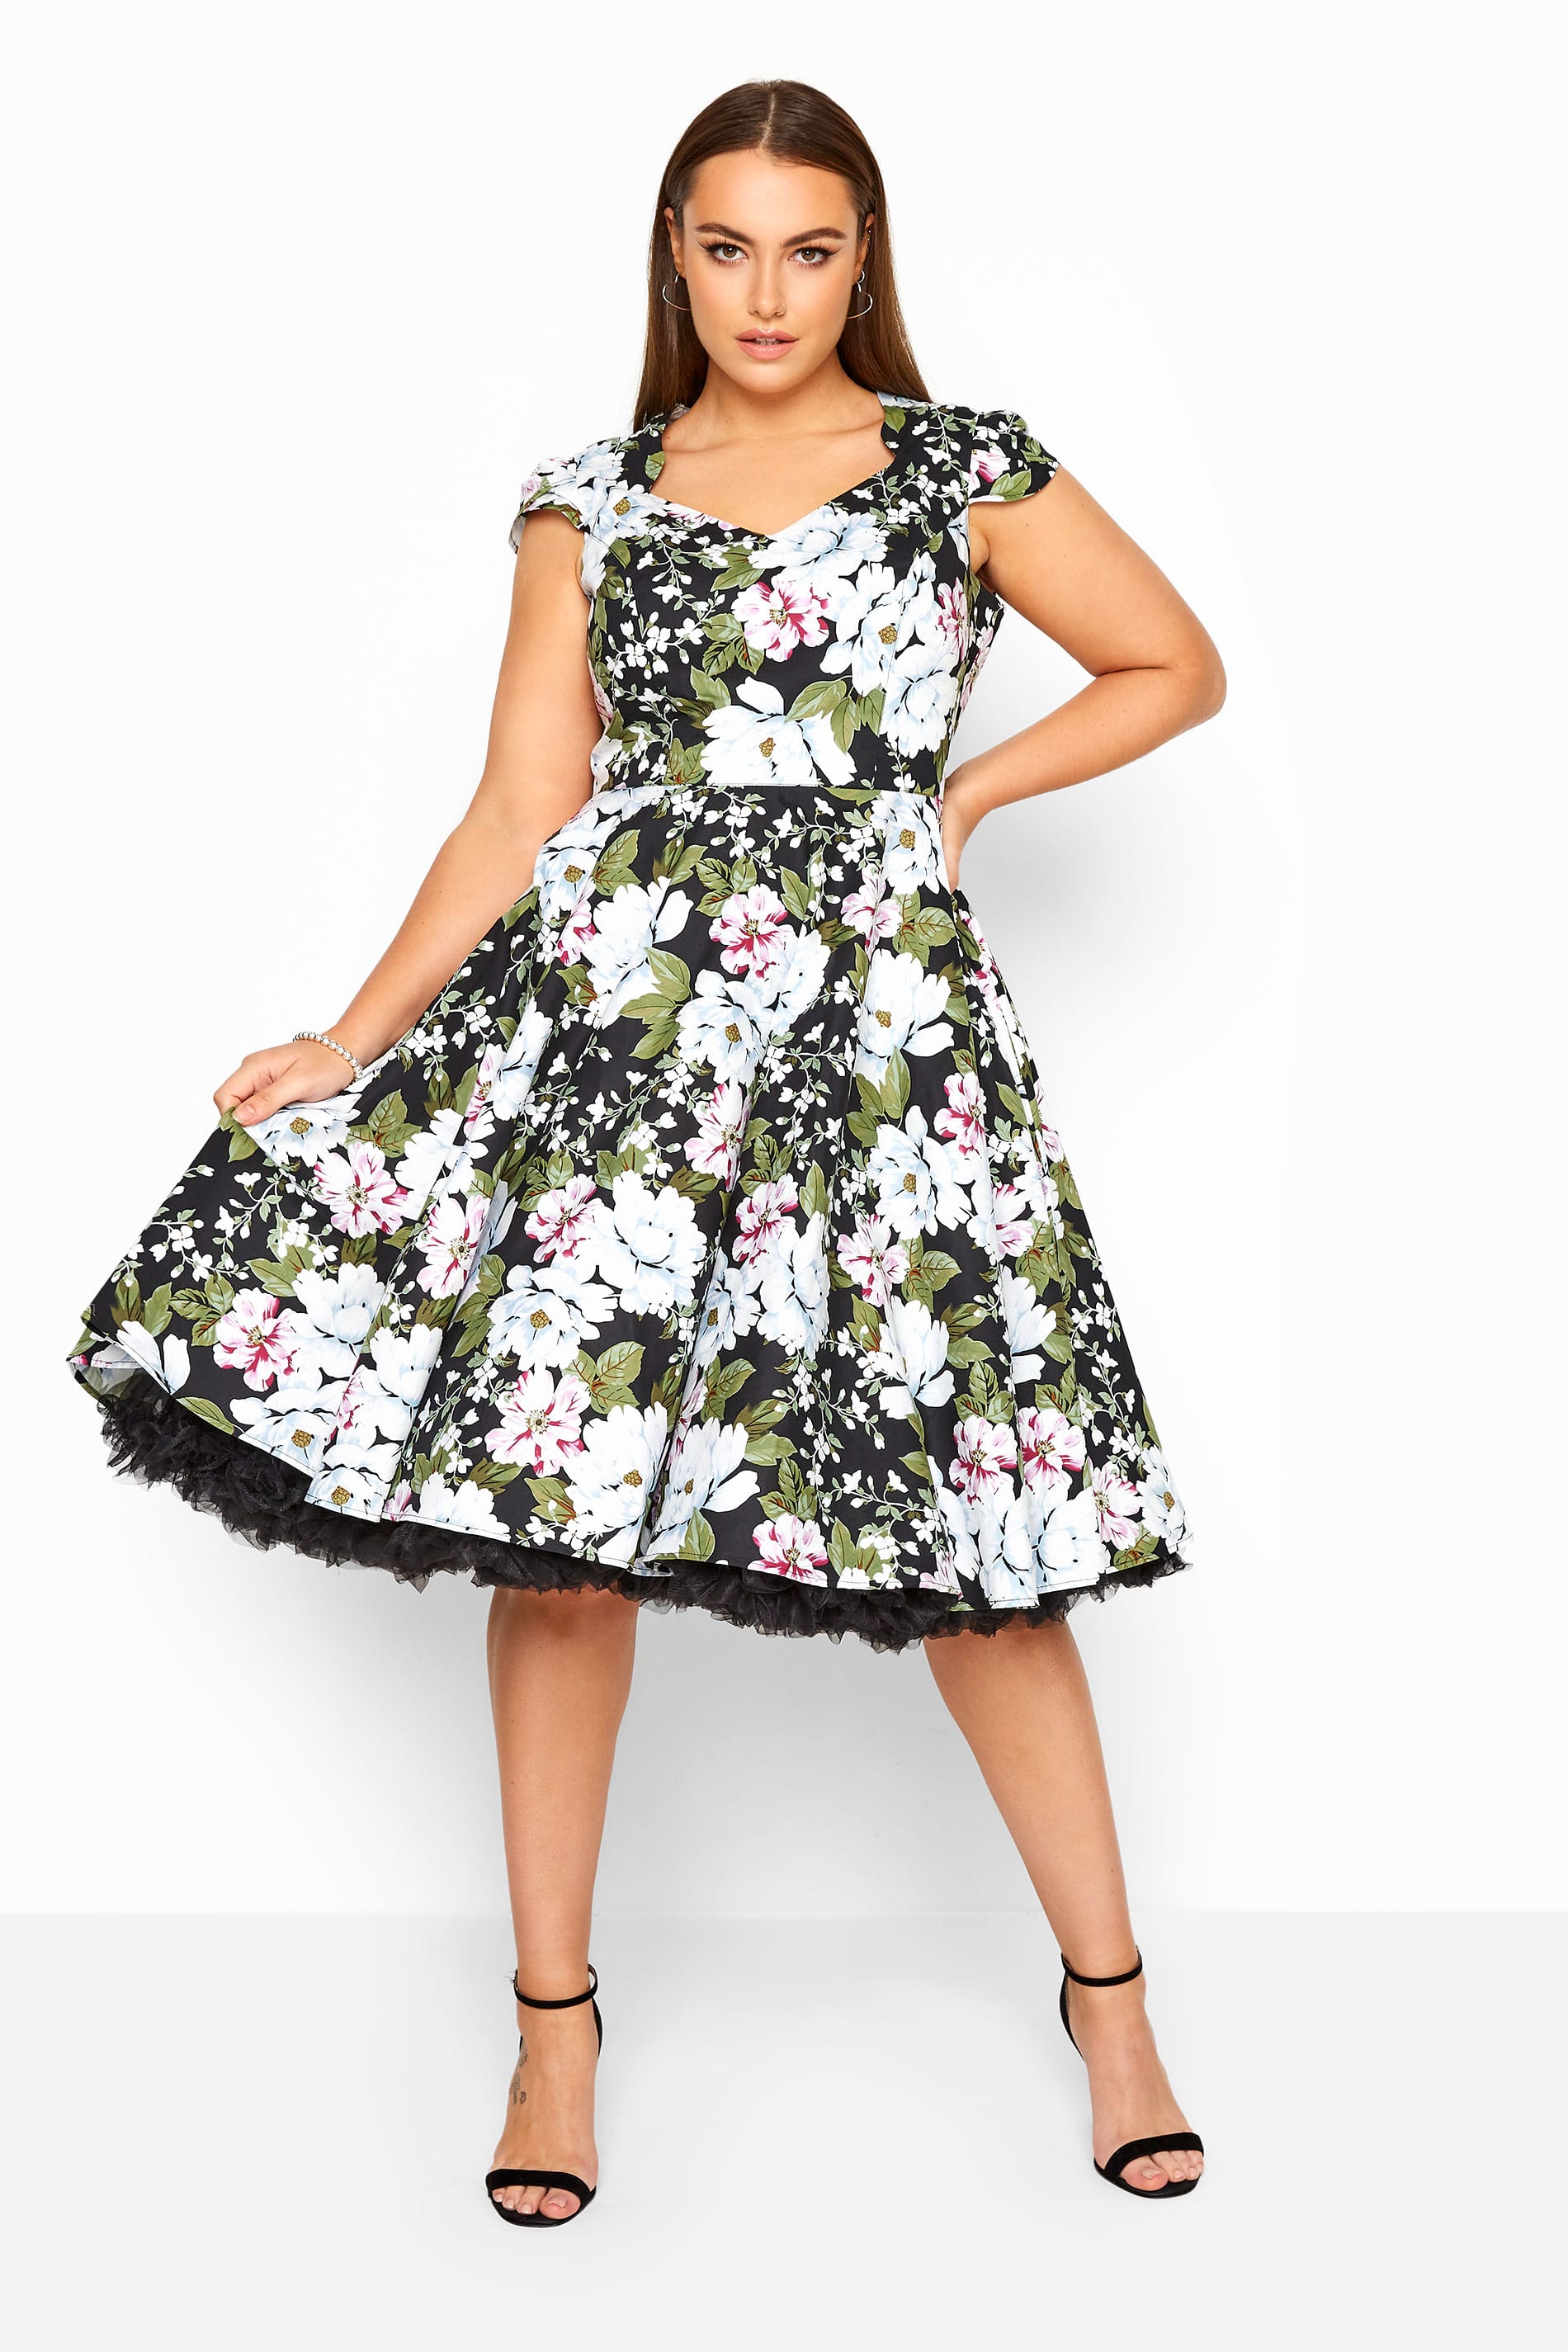 Hell Bunny Black And White Floral Print Alba Skater Dress Yours Clothing 